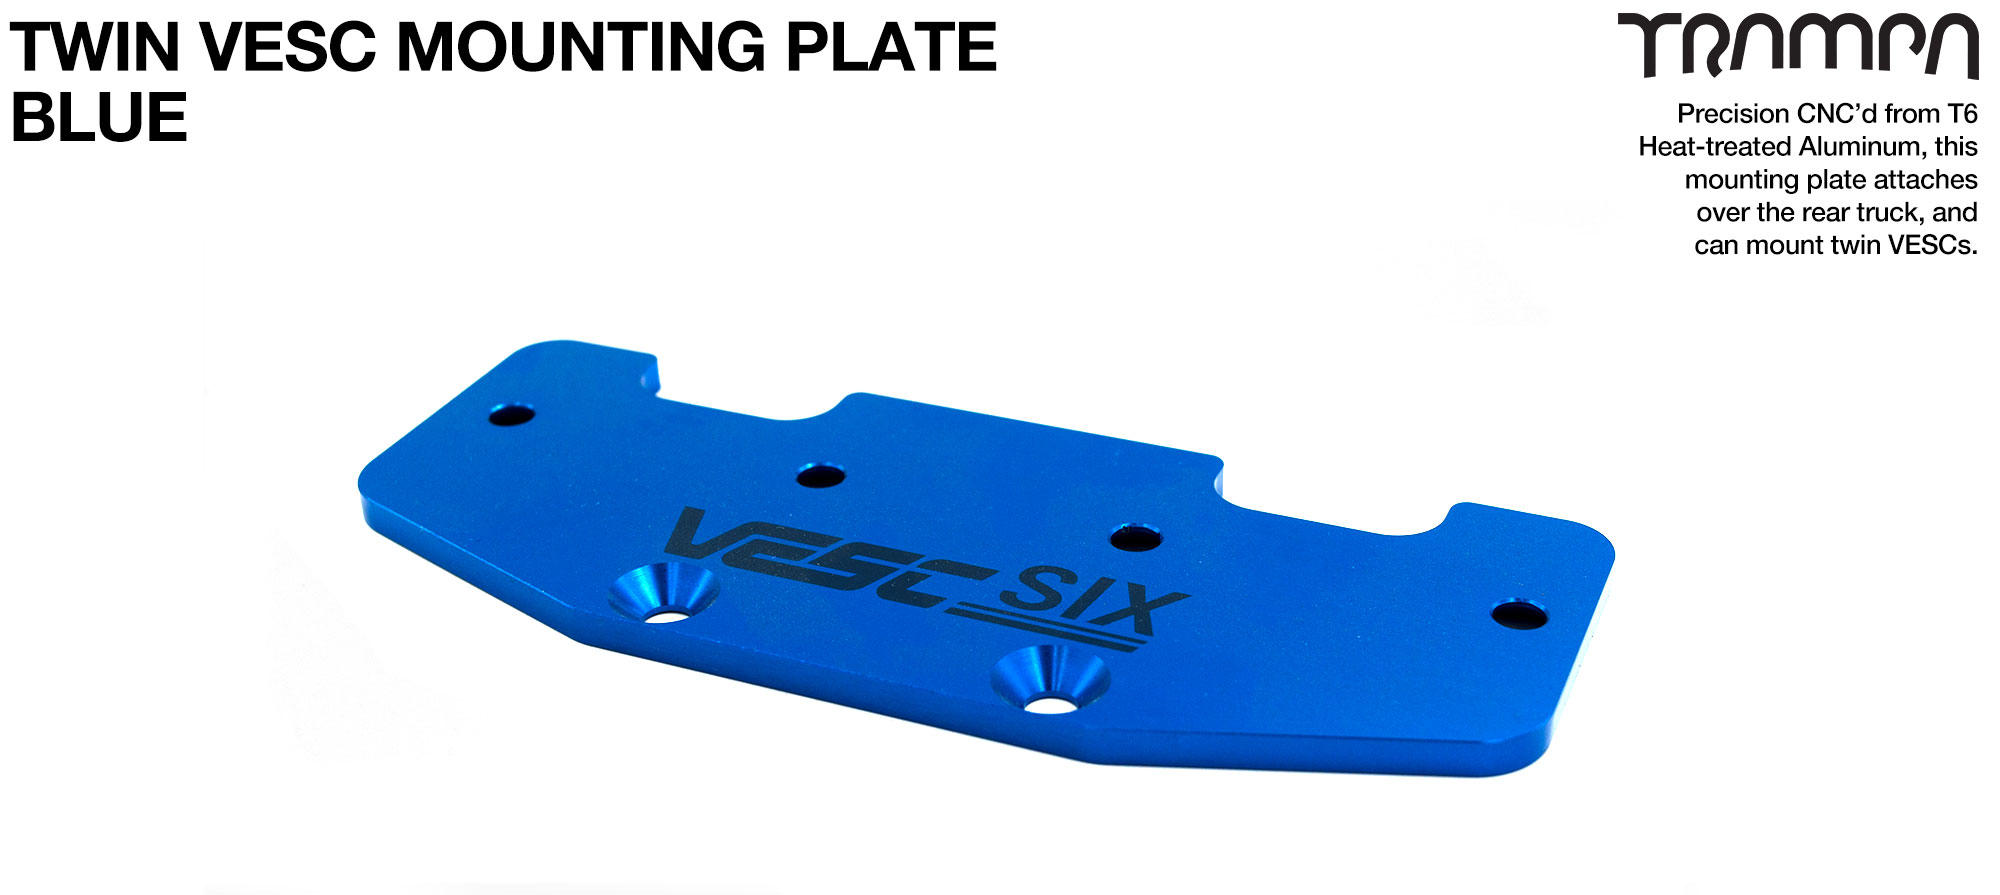 ALUMINIUM mounting Plate for TWIN VESC 6 - Anodised BLUE 